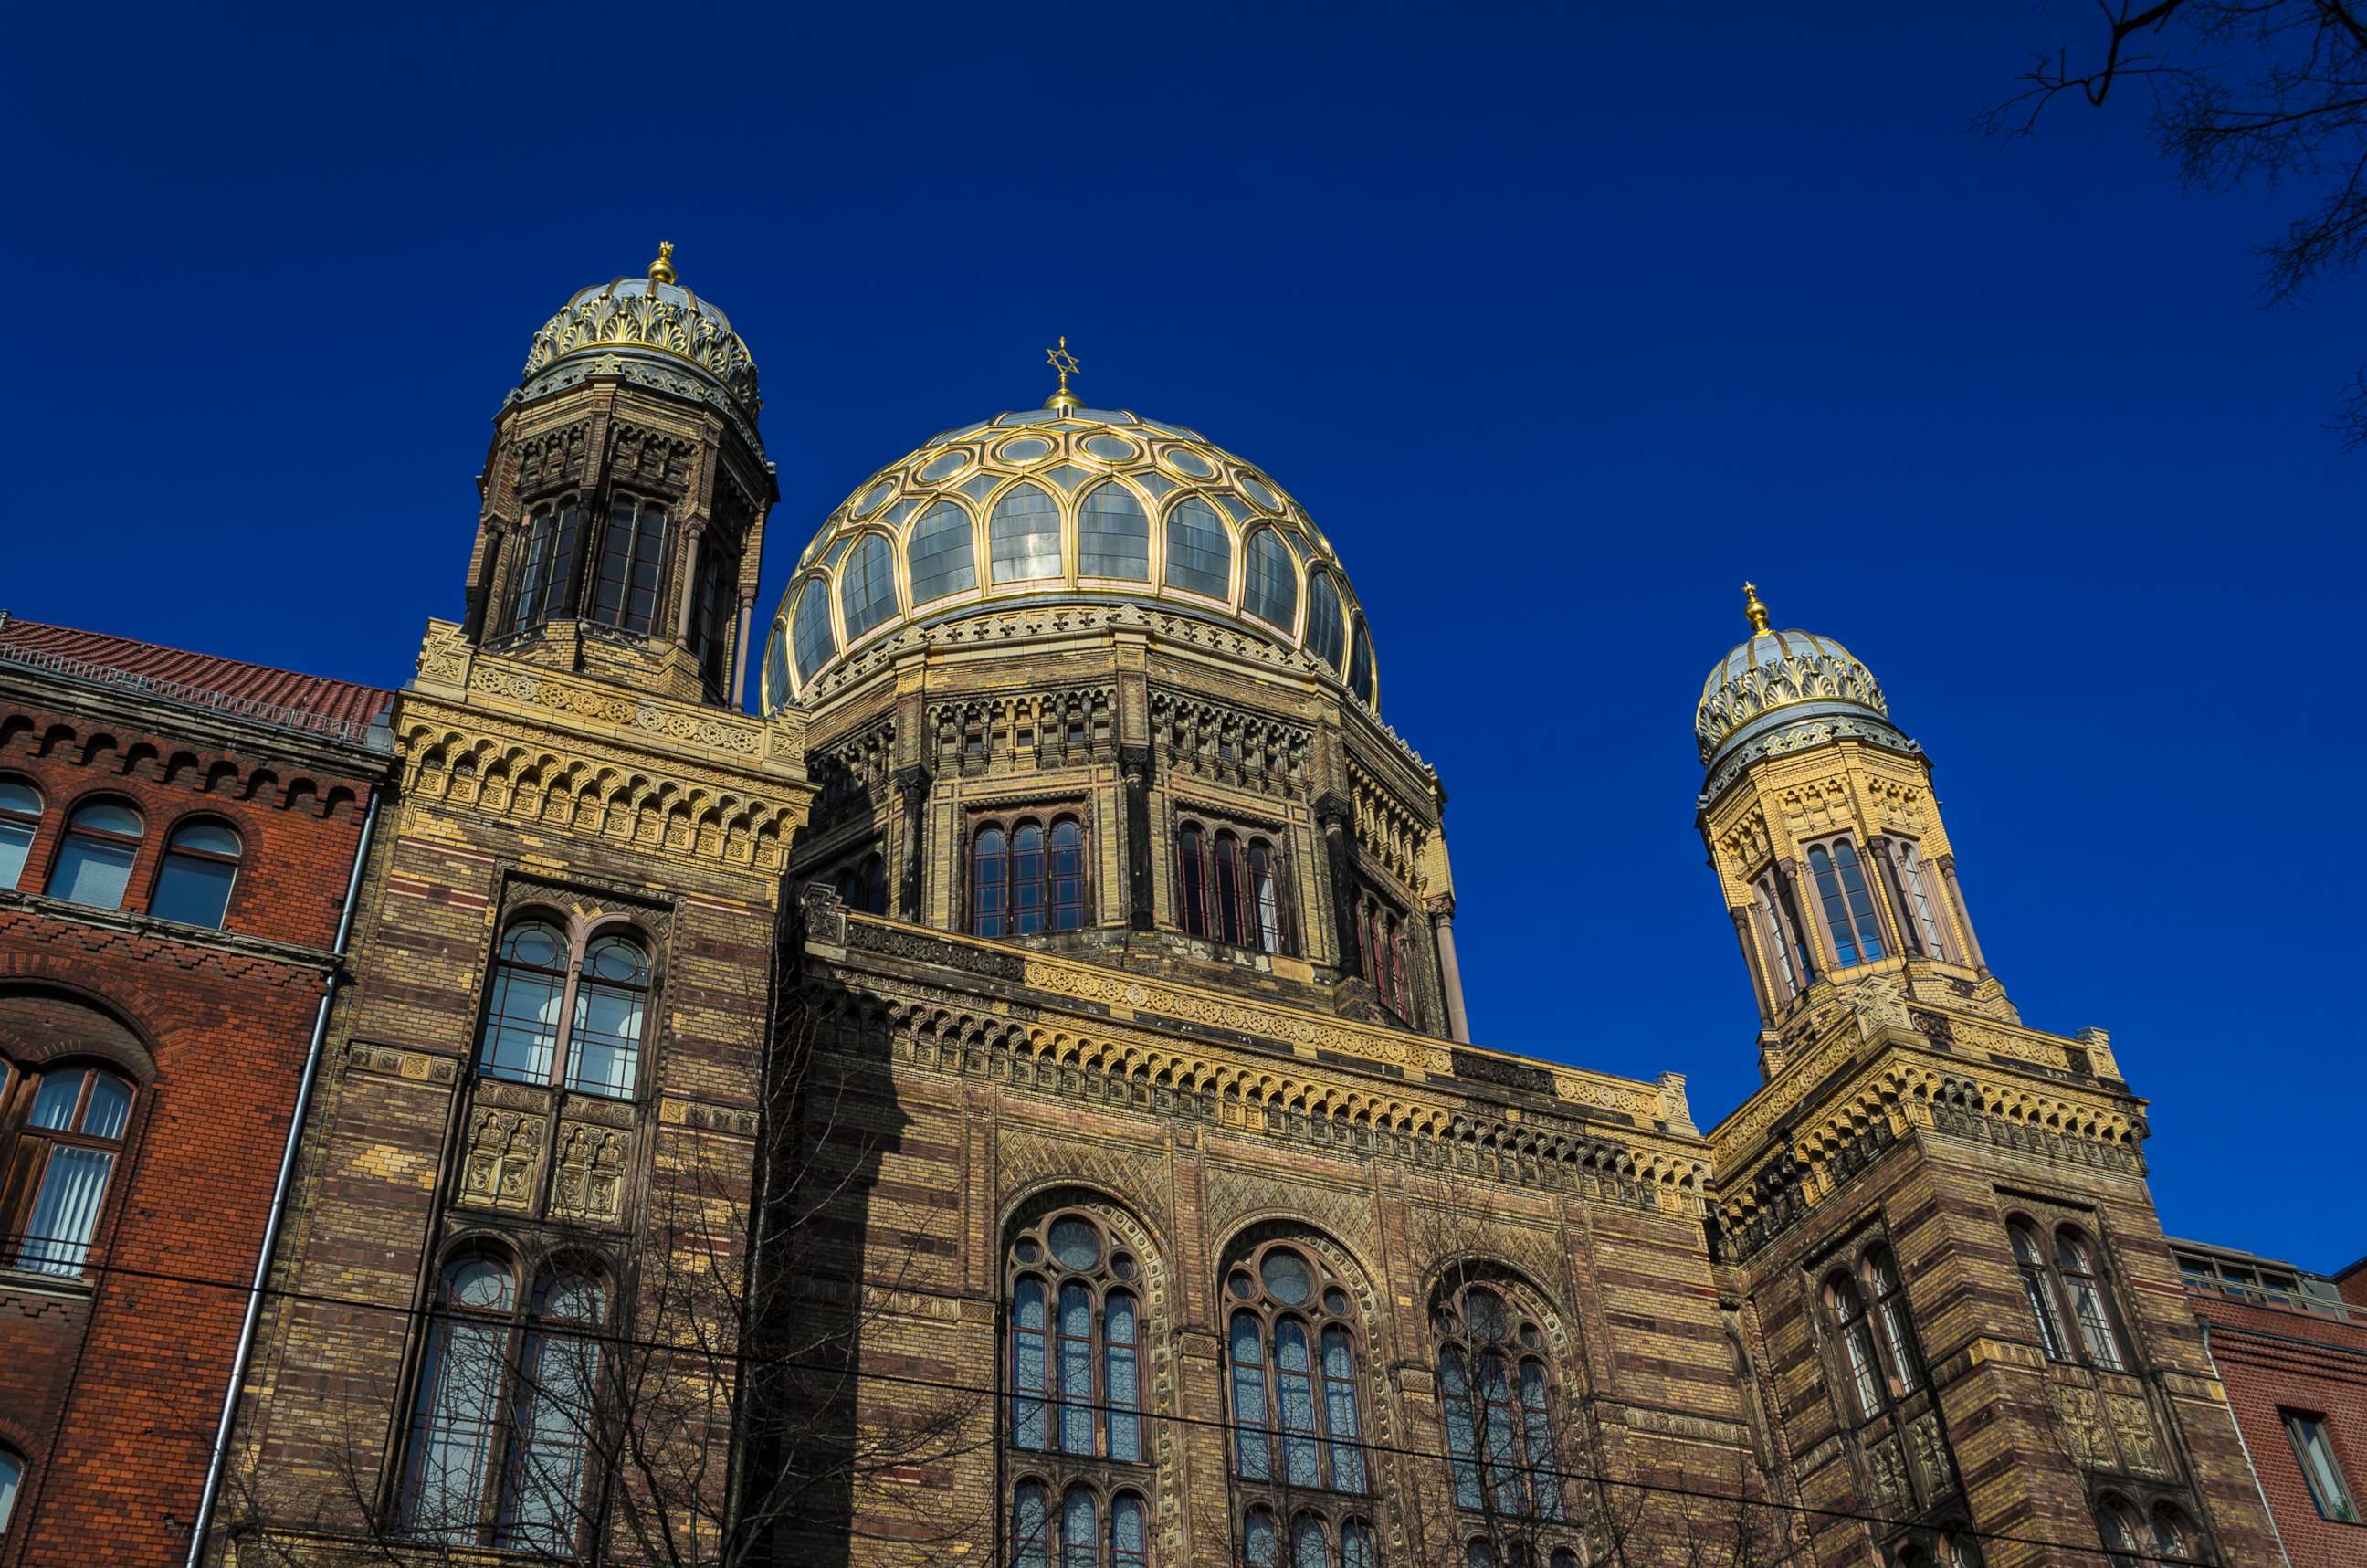 PHOTO: The New Synagogue in Berlin is pictured in this undated stock photo.